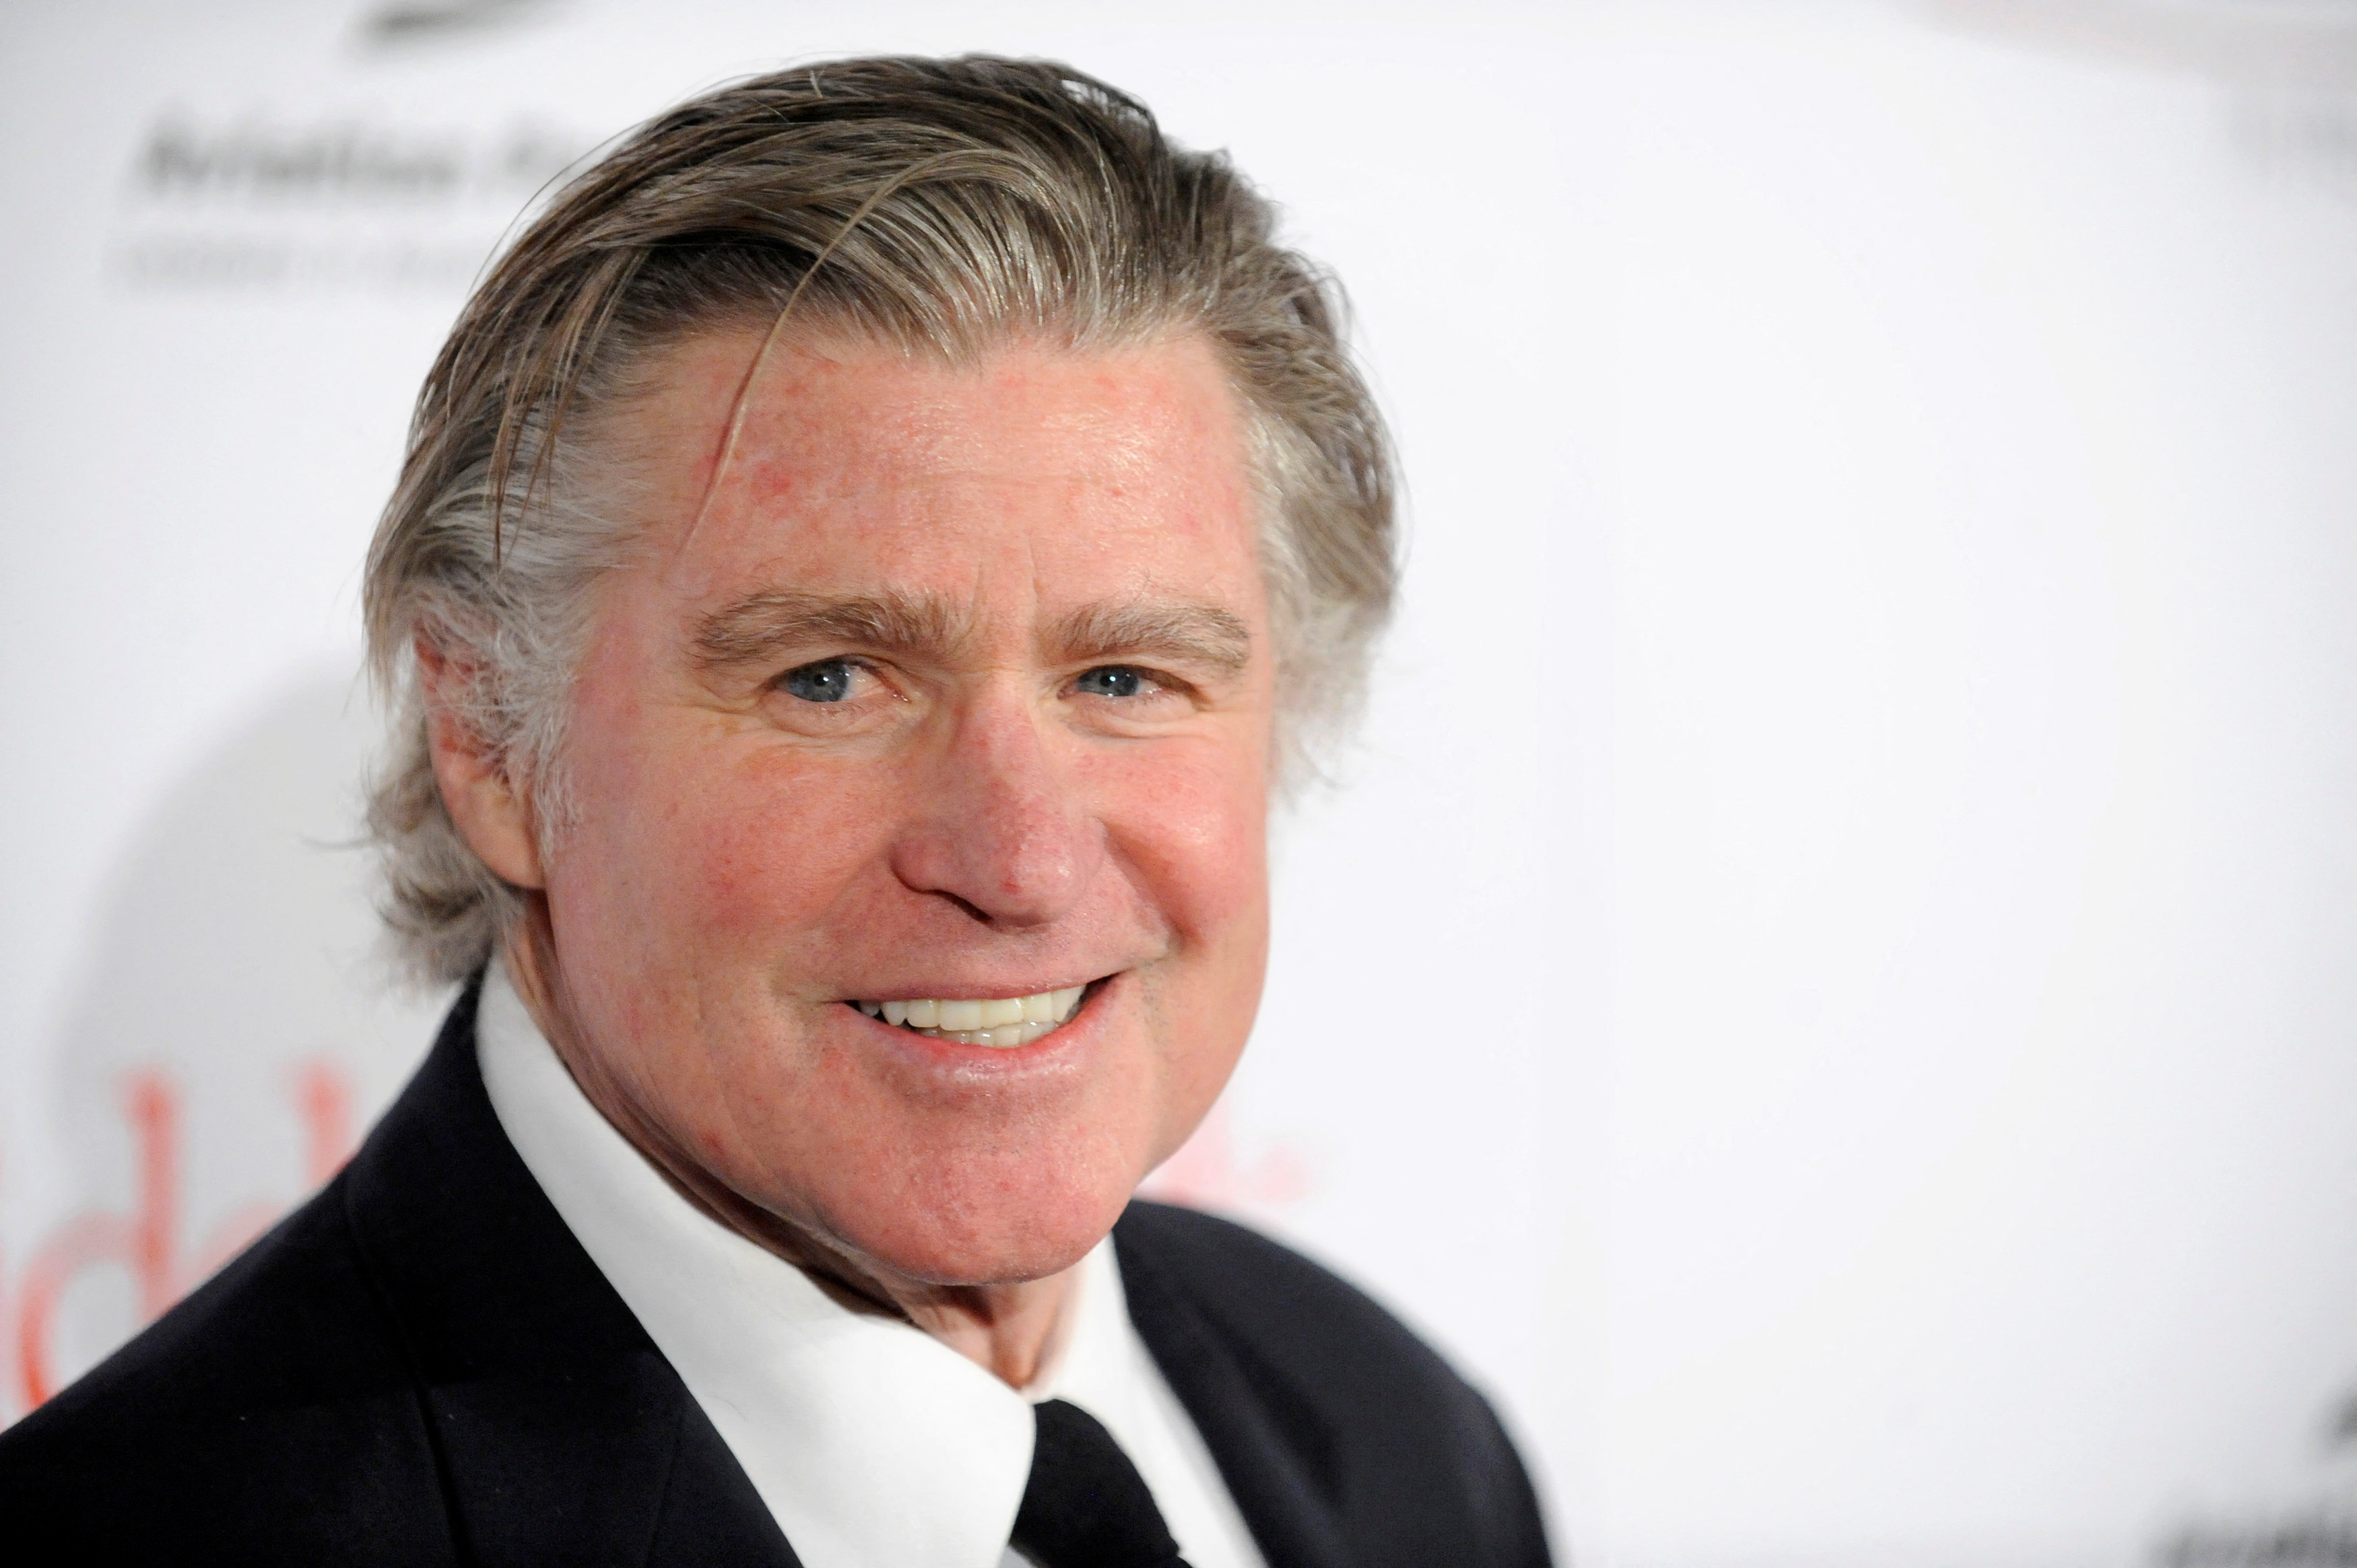 Actor Treat Williams died after being involved in motorcycle accident